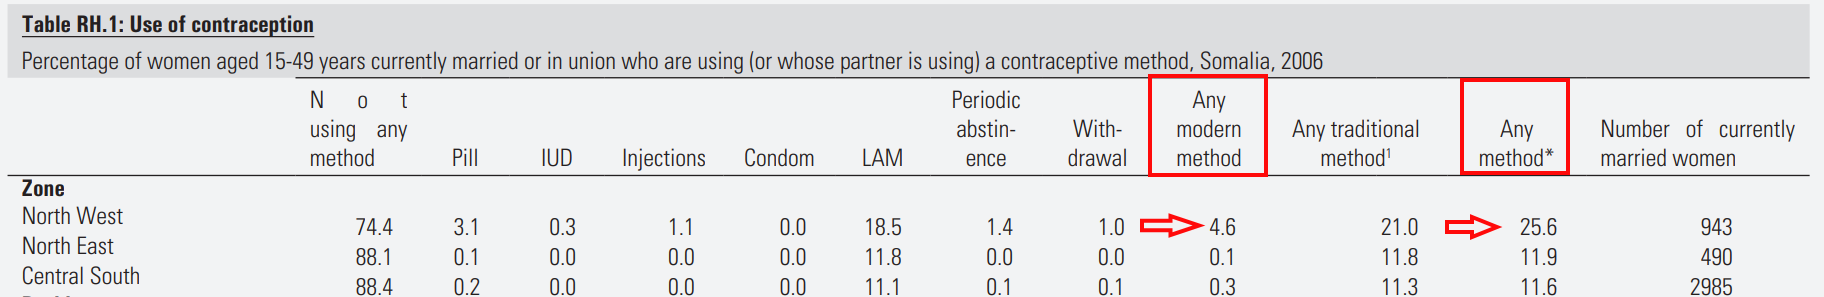 Use of contraceptives NW higher.png